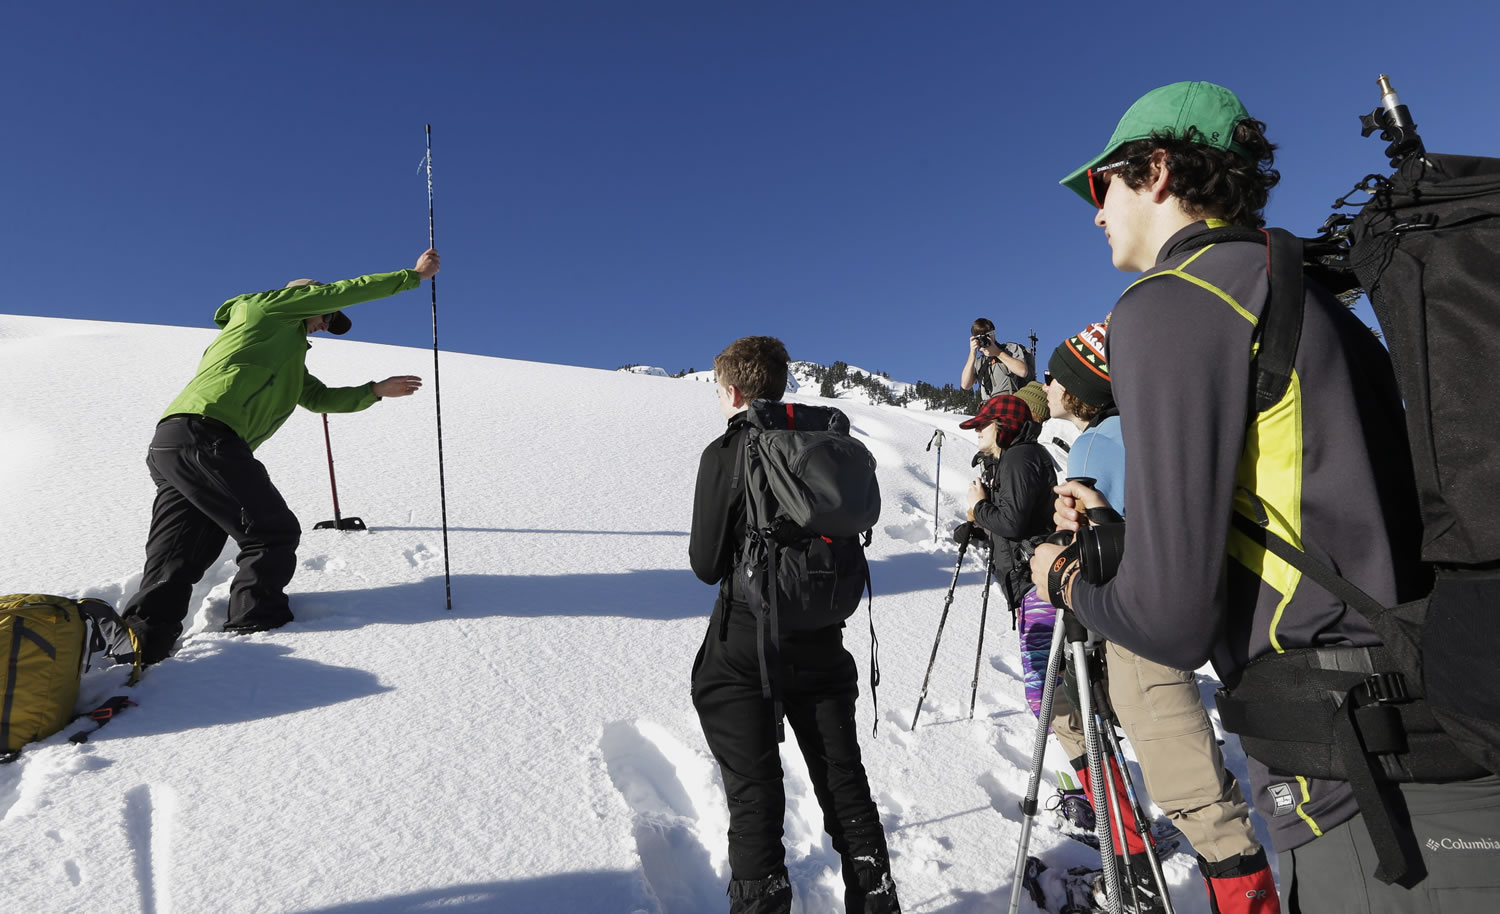 Eric Gullickson, left, instructor with the Northwest Avalanche Center, shows how to use an avalanche probe during an avalanche awareness field trip for teens at Mount Baker.